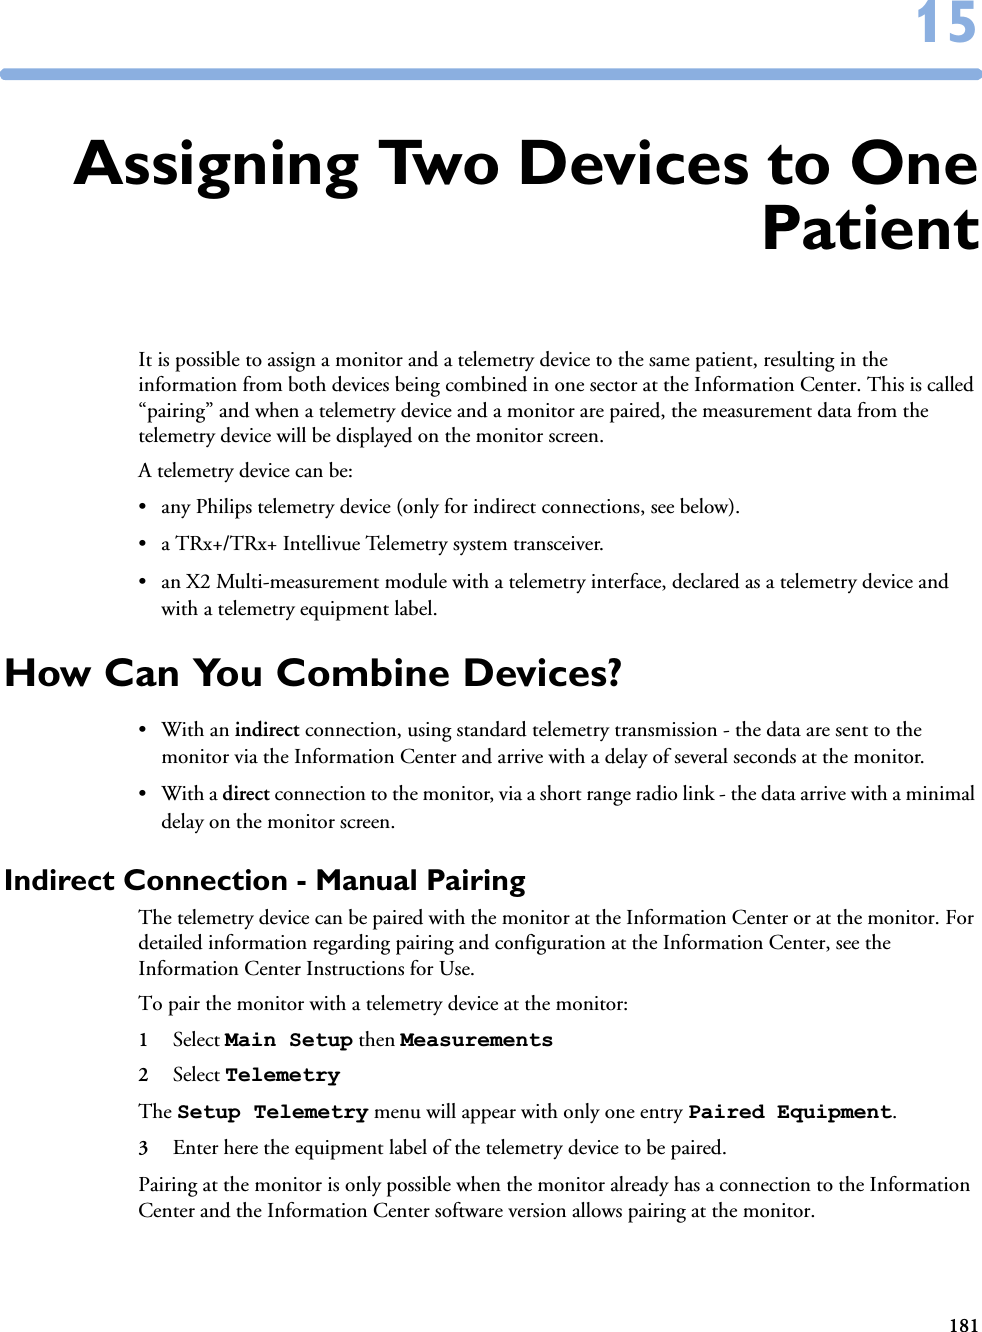 1811515Assigning Two Devices to OnePatientIt is possible to assign a monitor and a telemetry device to the same patient, resulting in the information from both devices being combined in one sector at the Information Center. This is called “pairing” and when a telemetry device and a monitor are paired, the measurement data from the telemetry device will be displayed on the monitor screen. A telemetry device can be:• any Philips telemetry device (only for indirect connections, see below).• a TRx+/TRx+ Intellivue Telemetry system transceiver.• an X2 Multi-measurement module with a telemetry interface, declared as a telemetry device and with a telemetry equipment label.How Can You Combine Devices?•With an indirect connection, using standard telemetry transmission - the data are sent to the monitor via the Information Center and arrive with a delay of several seconds at the monitor. •With a direct connection to the monitor, via a short range radio link - the data arrive with a minimal delay on the monitor screen.Indirect Connection - Manual PairingThe telemetry device can be paired with the monitor at the Information Center or at the monitor. For detailed information regarding pairing and configuration at the Information Center, see the Information Center Instructions for Use.To pair the monitor with a telemetry device at the monitor:1Select Main Setup then Measurements 2Select Telemetry The Setup Telemetry menu will appear with only one entry Paired Equipment.3Enter here the equipment label of the telemetry device to be paired. Pairing at the monitor is only possible when the monitor already has a connection to the Information Center and the Information Center software version allows pairing at the monitor.